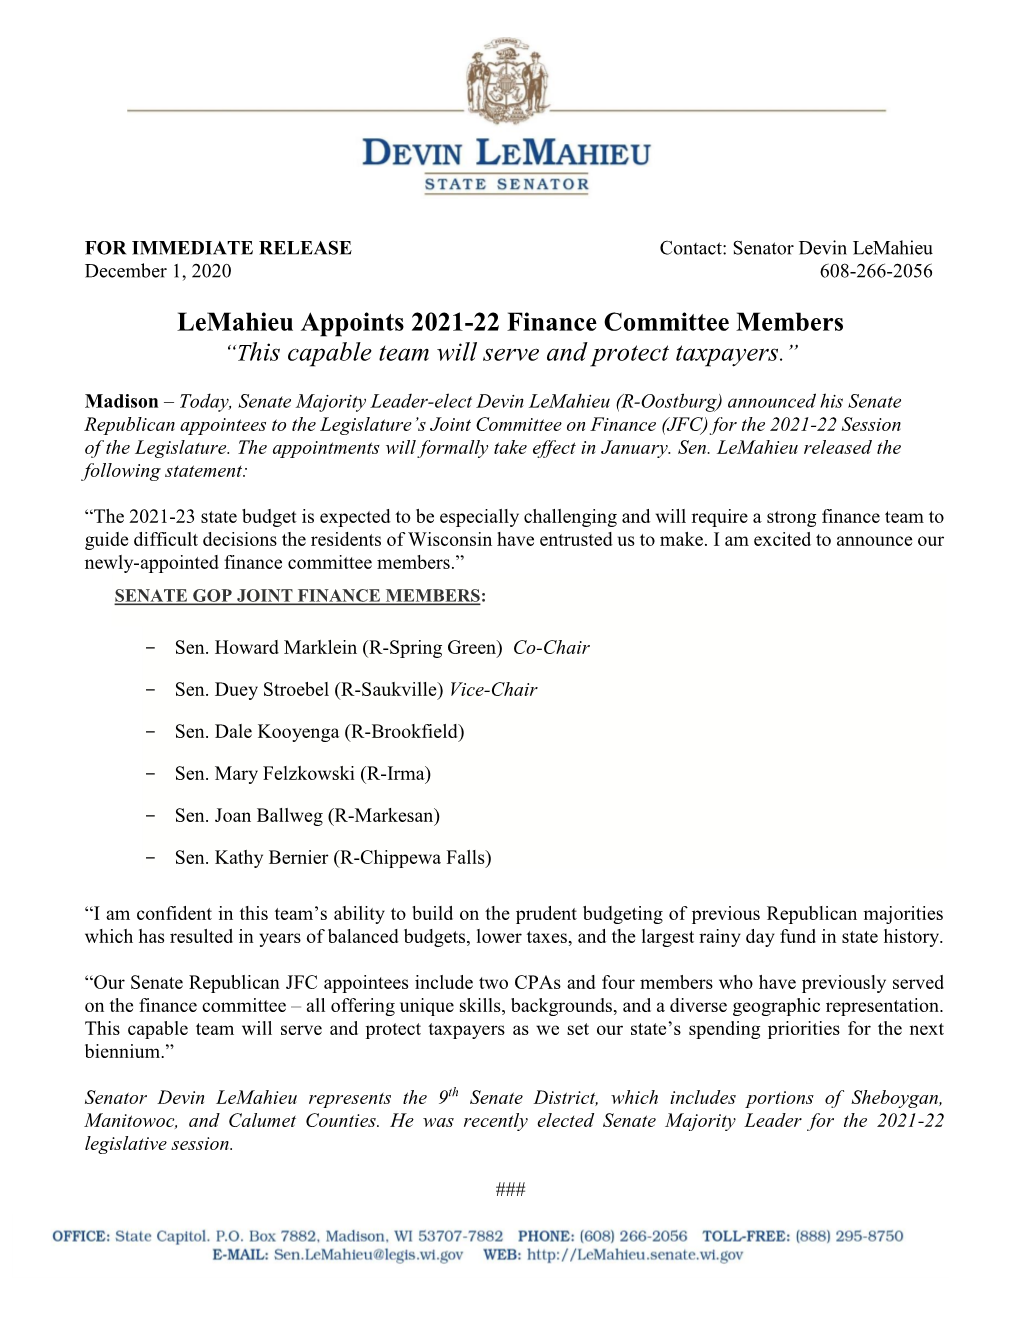 Lemahieu Appoints 2021-22 Finance Committee Members “This Capable Team Will Serve and Protect Taxpayers.”